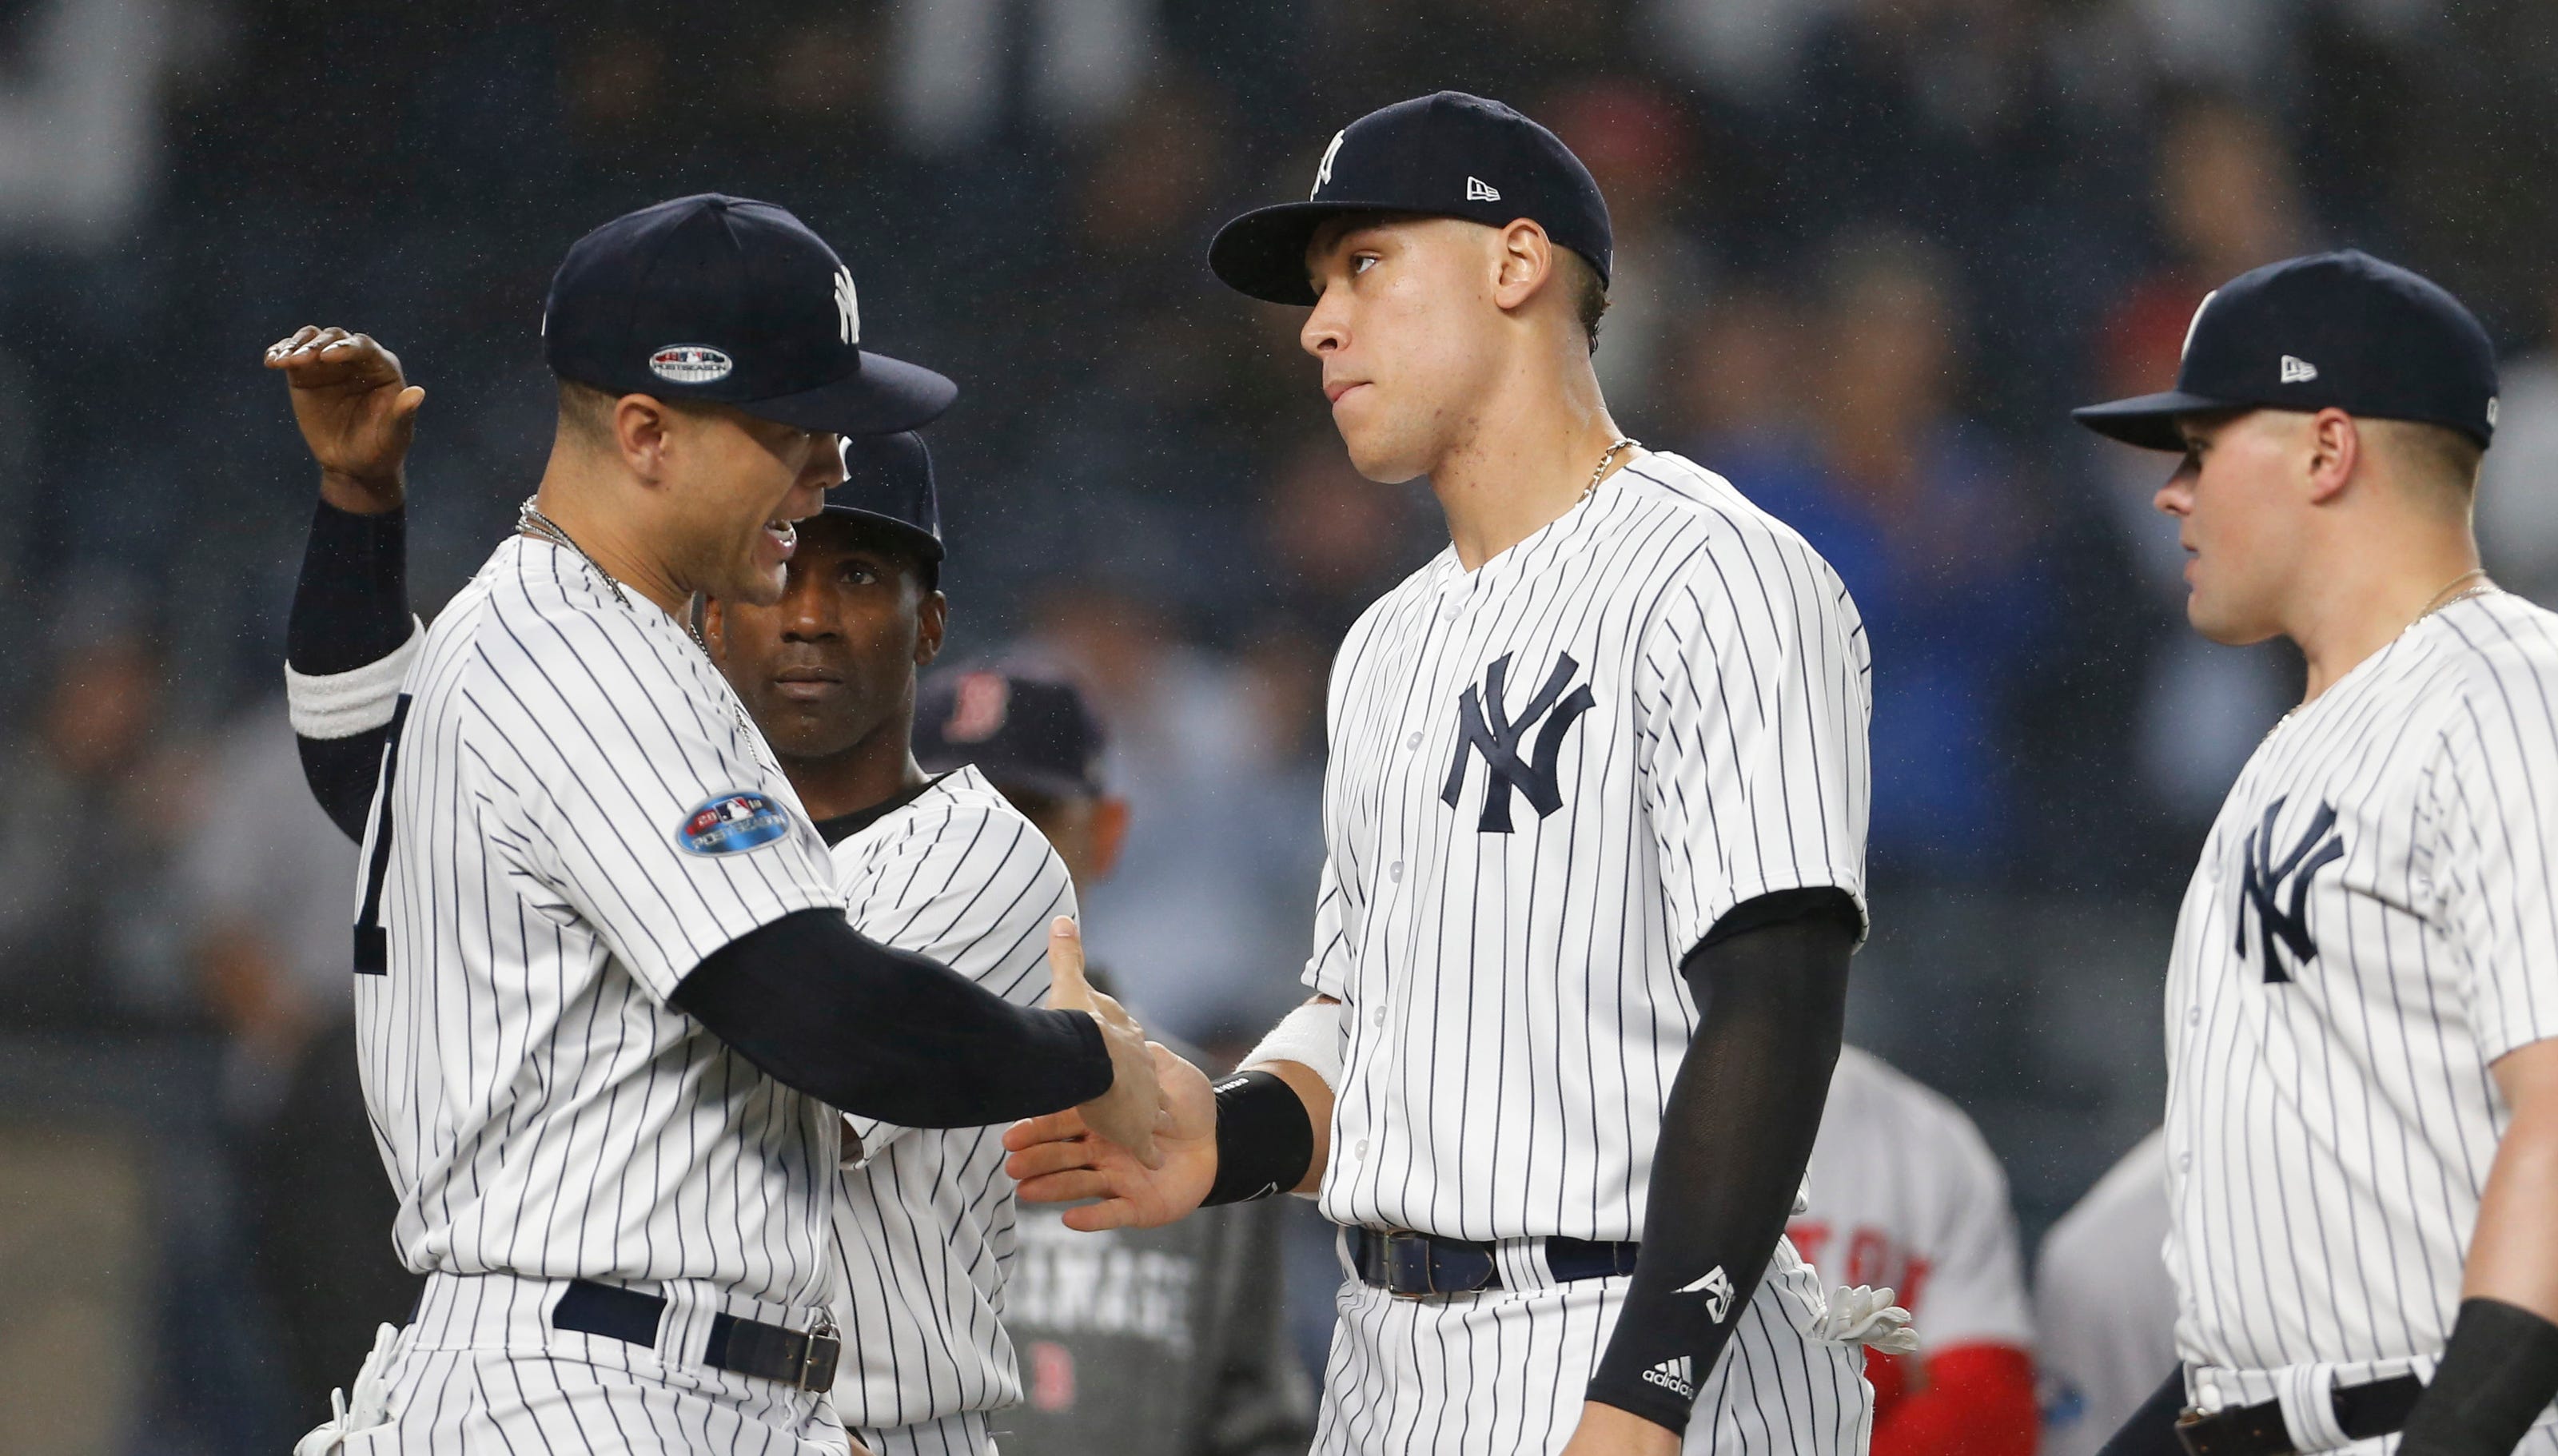 After disappointing end to 2018, where do the Yankees go from here? 